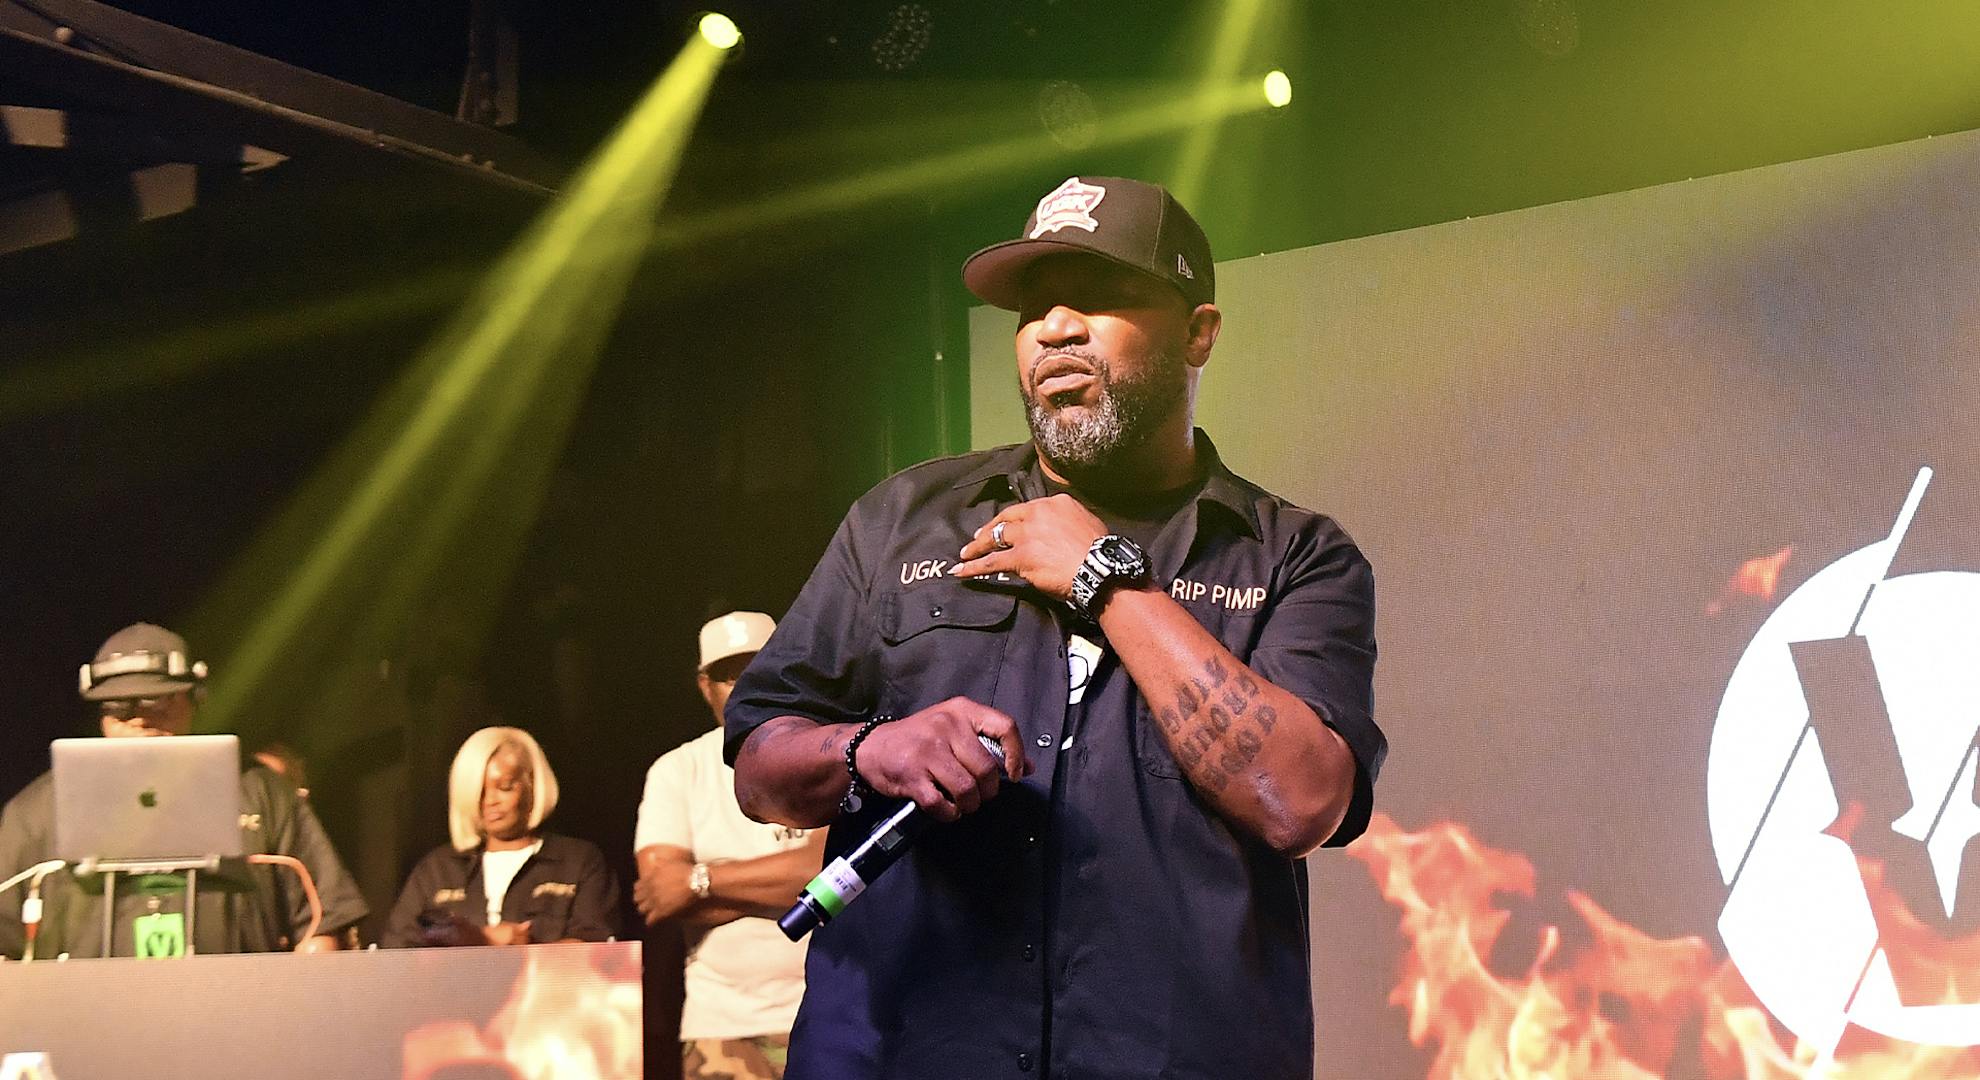 Bun B of UGK perform onstage during VERZUZ 8 Ball & MJG vs UGK at Terminal West on May 26, 2022 in Atlanta, Georgia. (Photo by Paras Griffin/Getty Images)